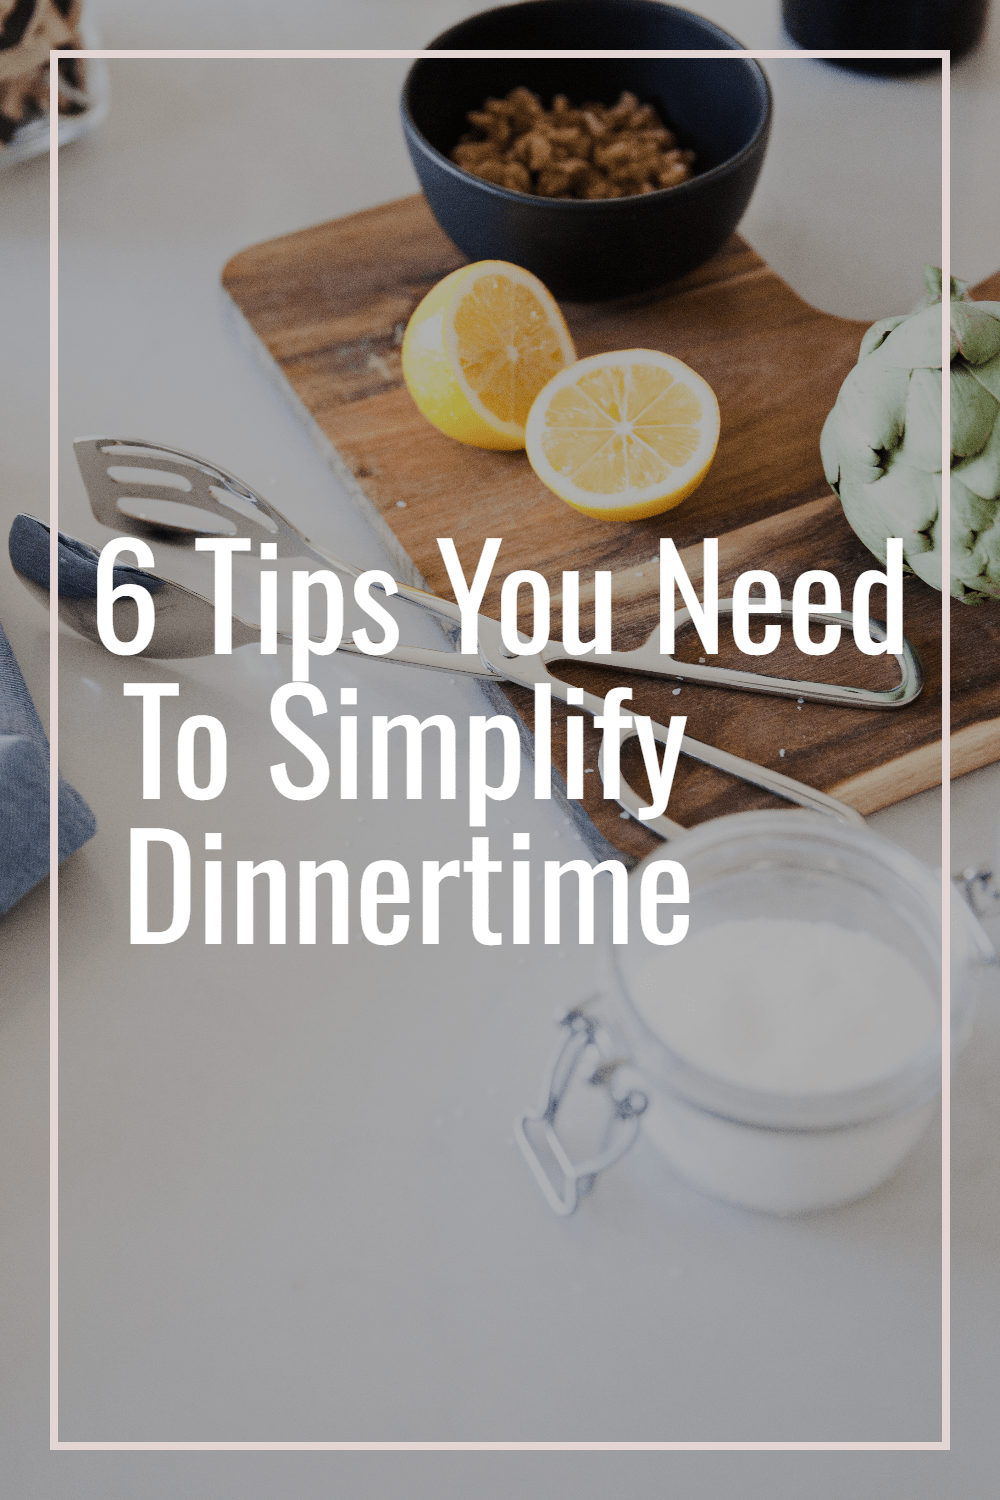 6 Tips You Ned To Simplify Dinner | Cutting board with lemon & seasonings